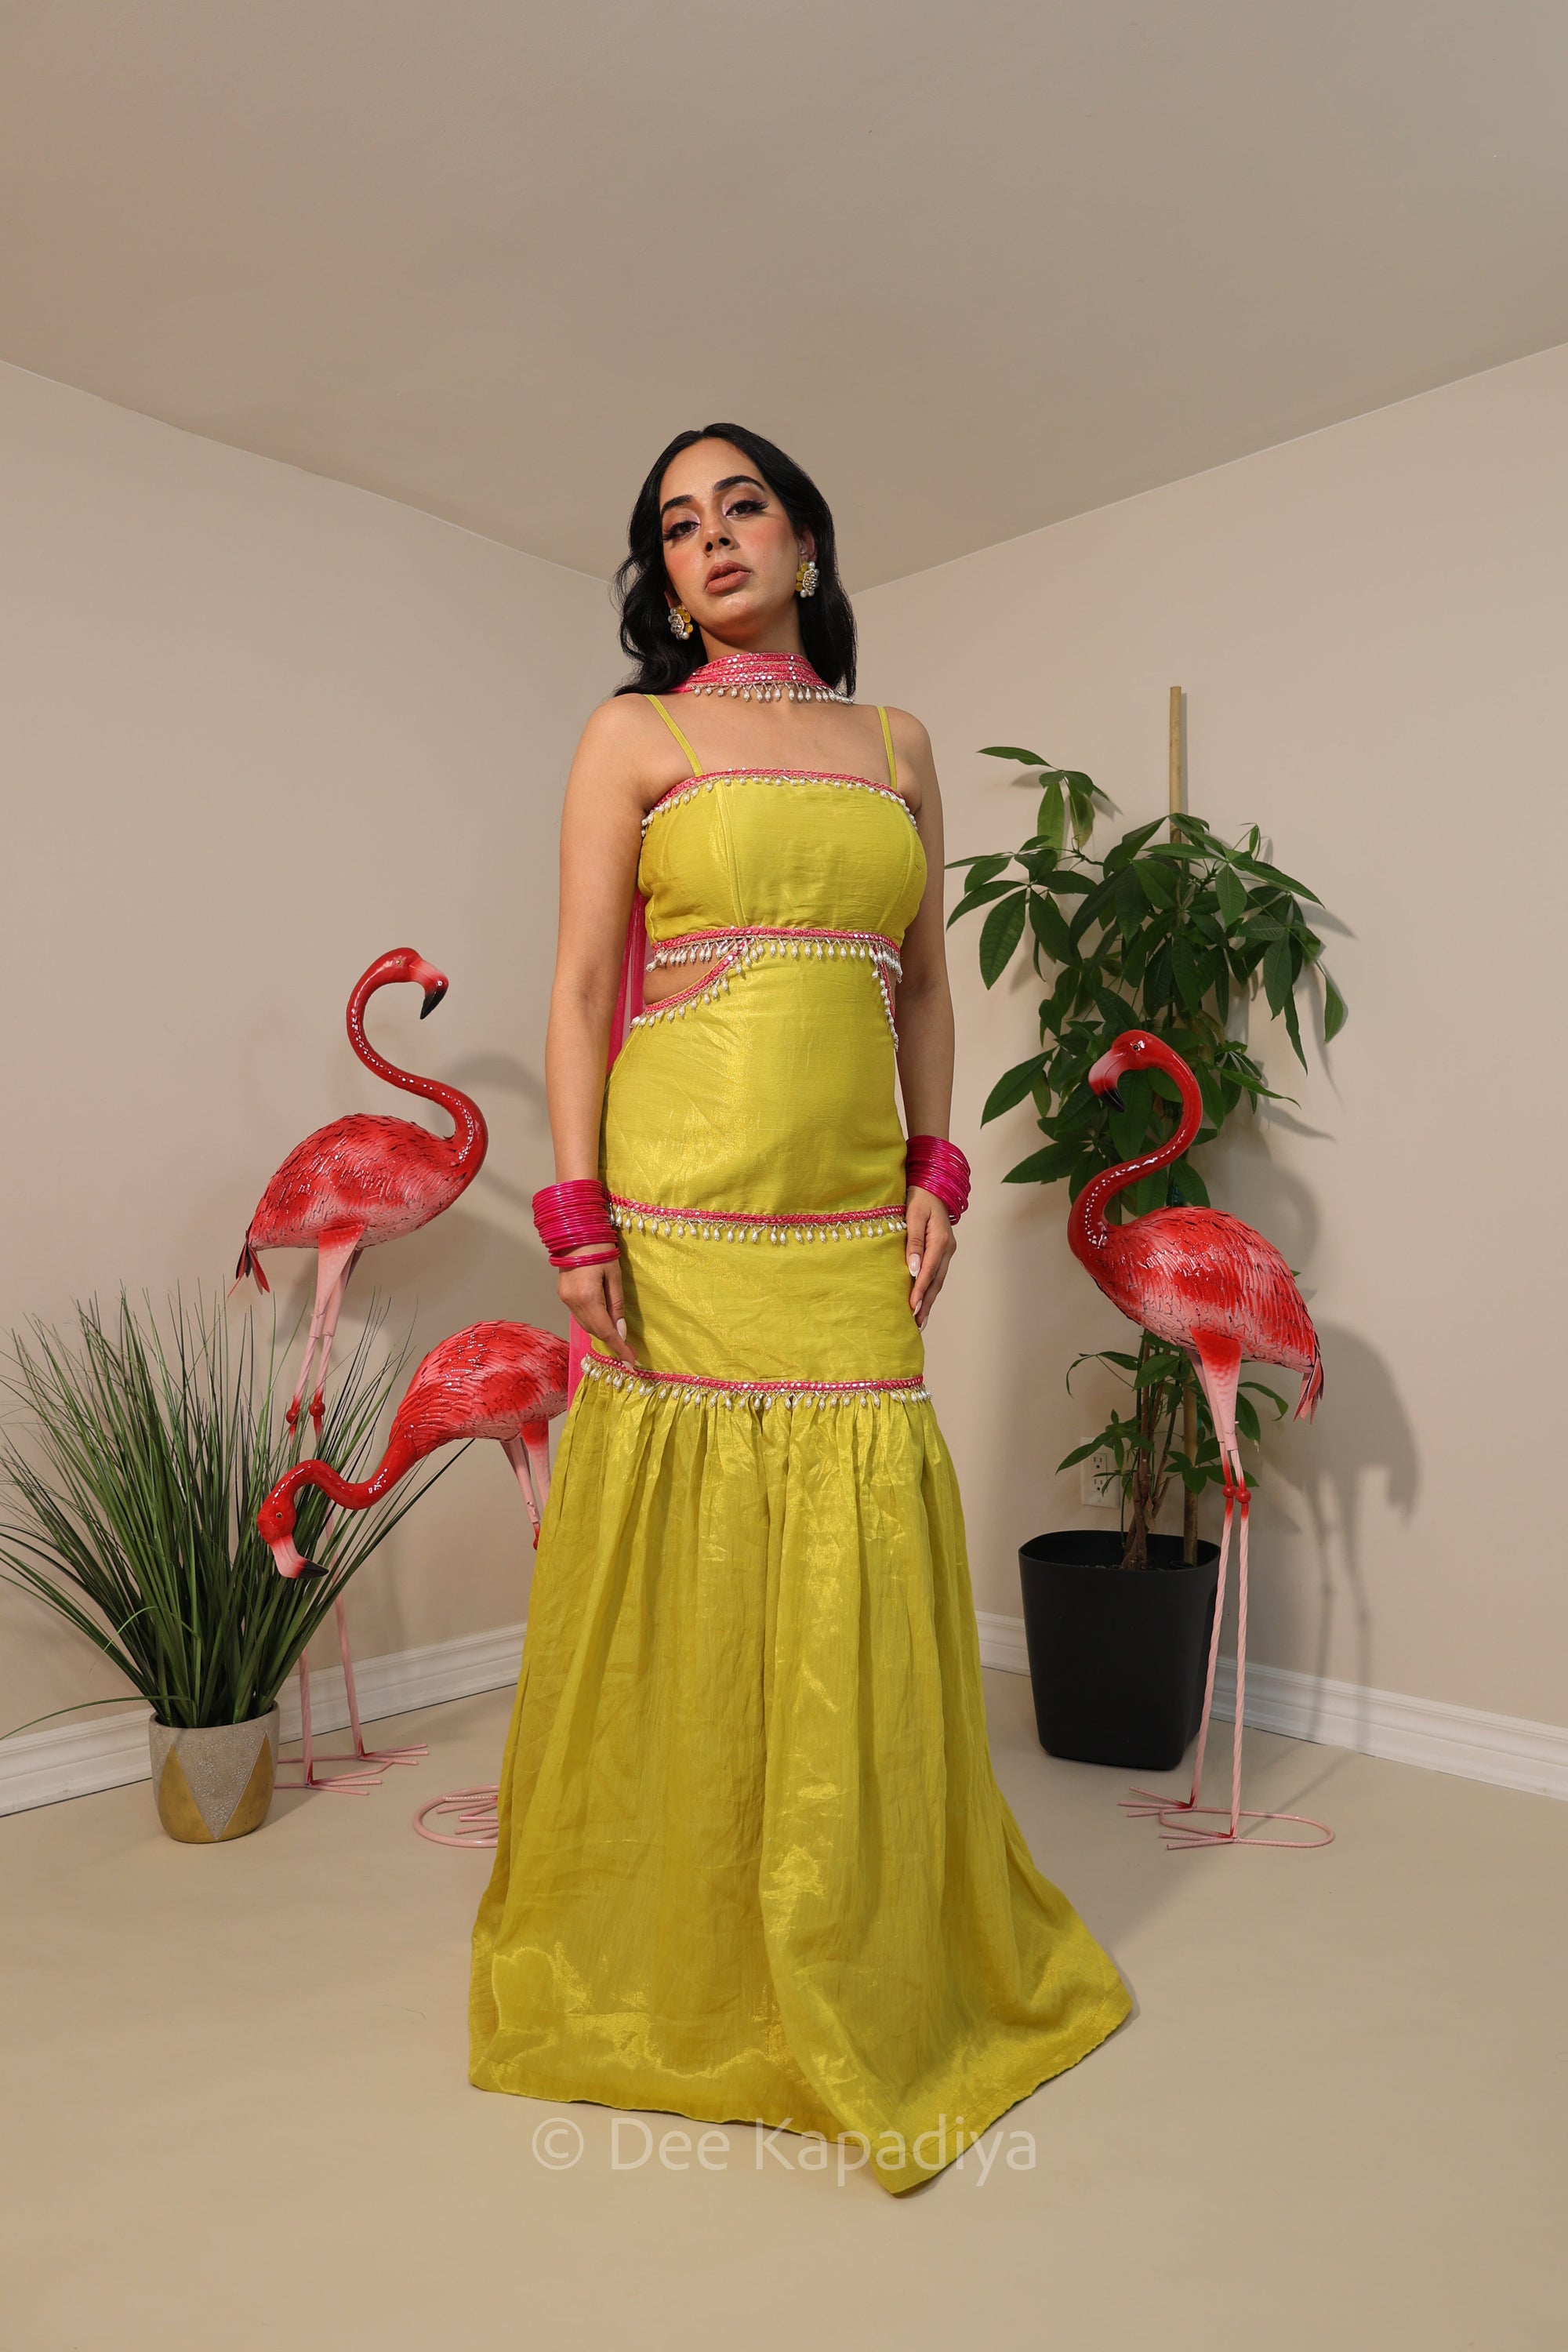 Shanti from Om Shanti Om, elegant and sophisticated neon yellow and hot pink combo dress lehenga set perfect for haldi and mehendi event. 